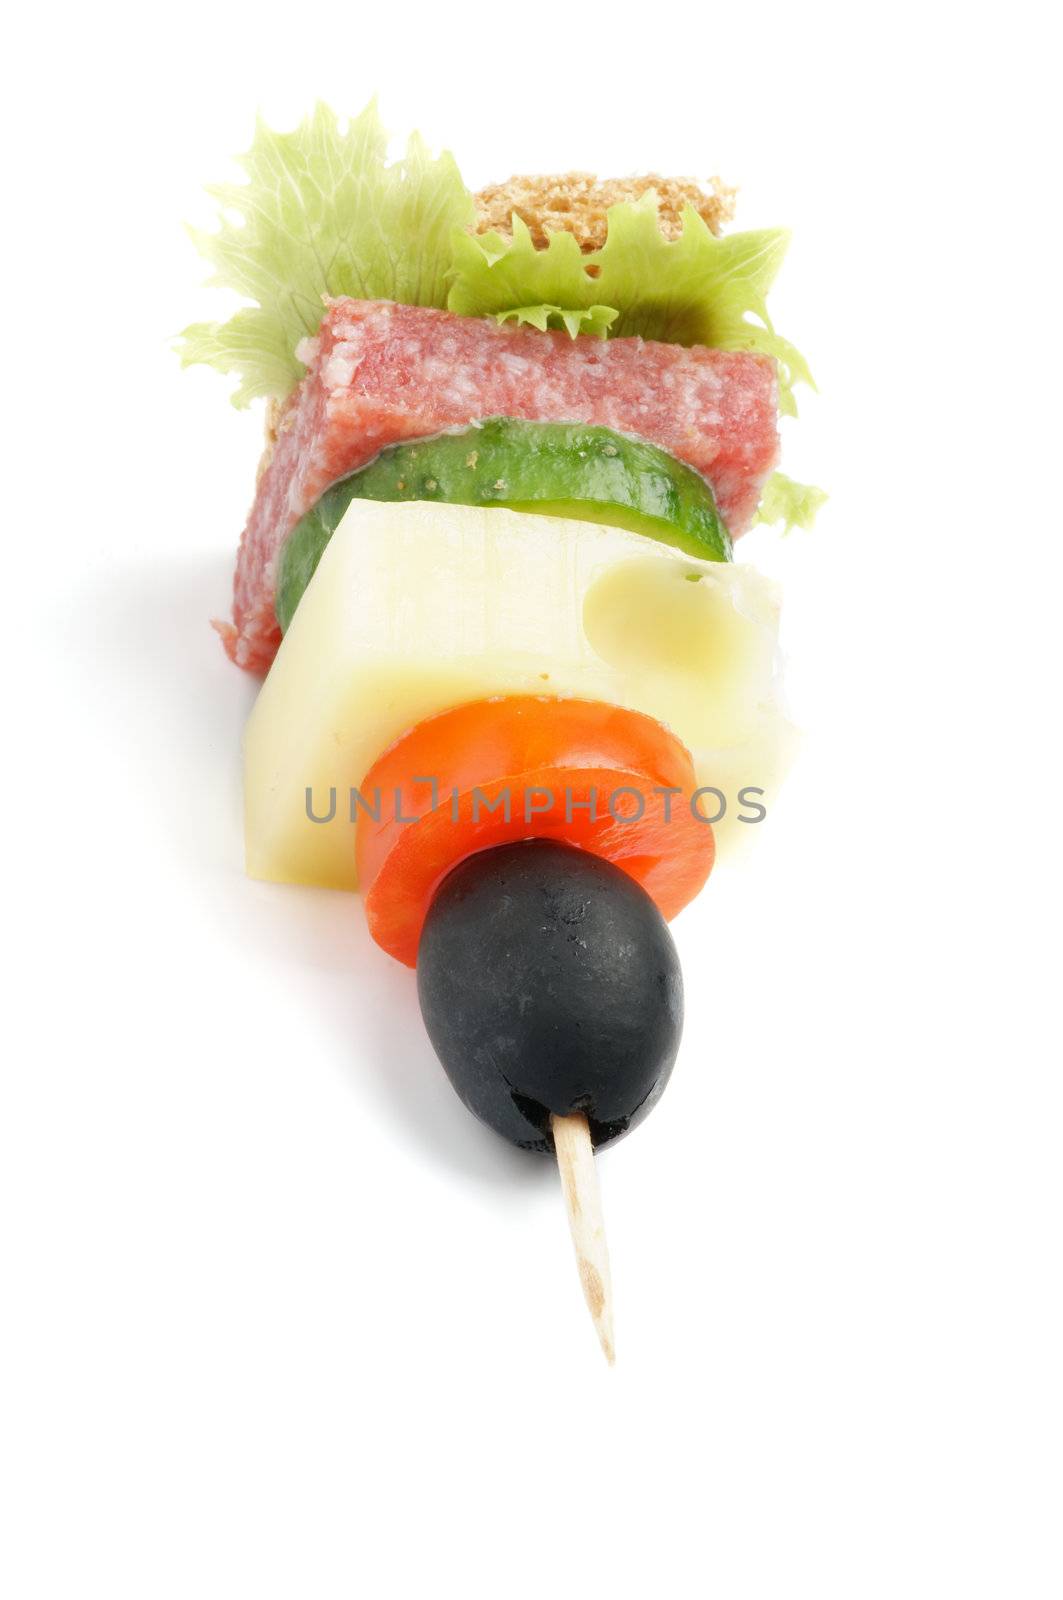 Single Canape with Lettuce, Salami, Tomatoes, Cheese, Cucumber,Black Olive, and Whole Grain Bread isolated on white background